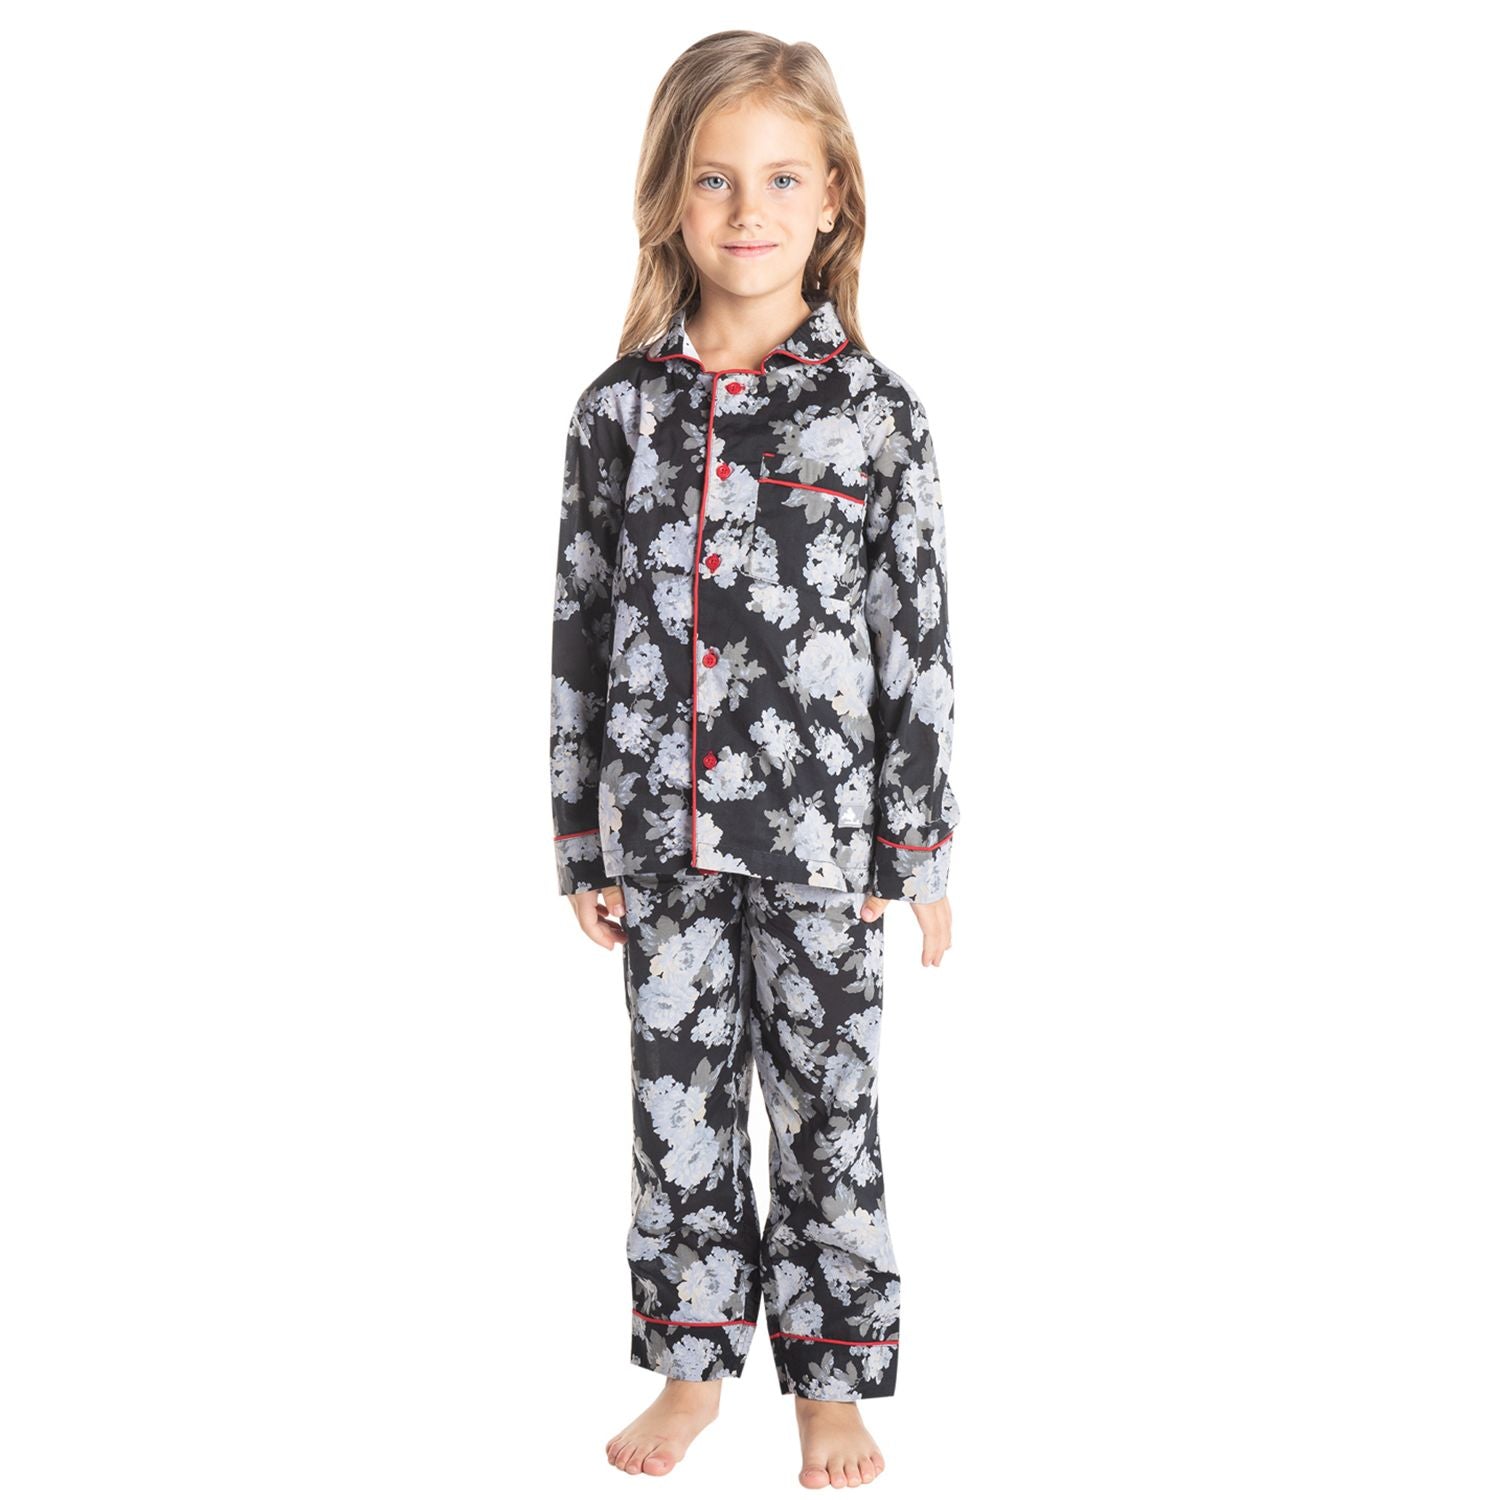 Flower Bed Nightsuit for Girls